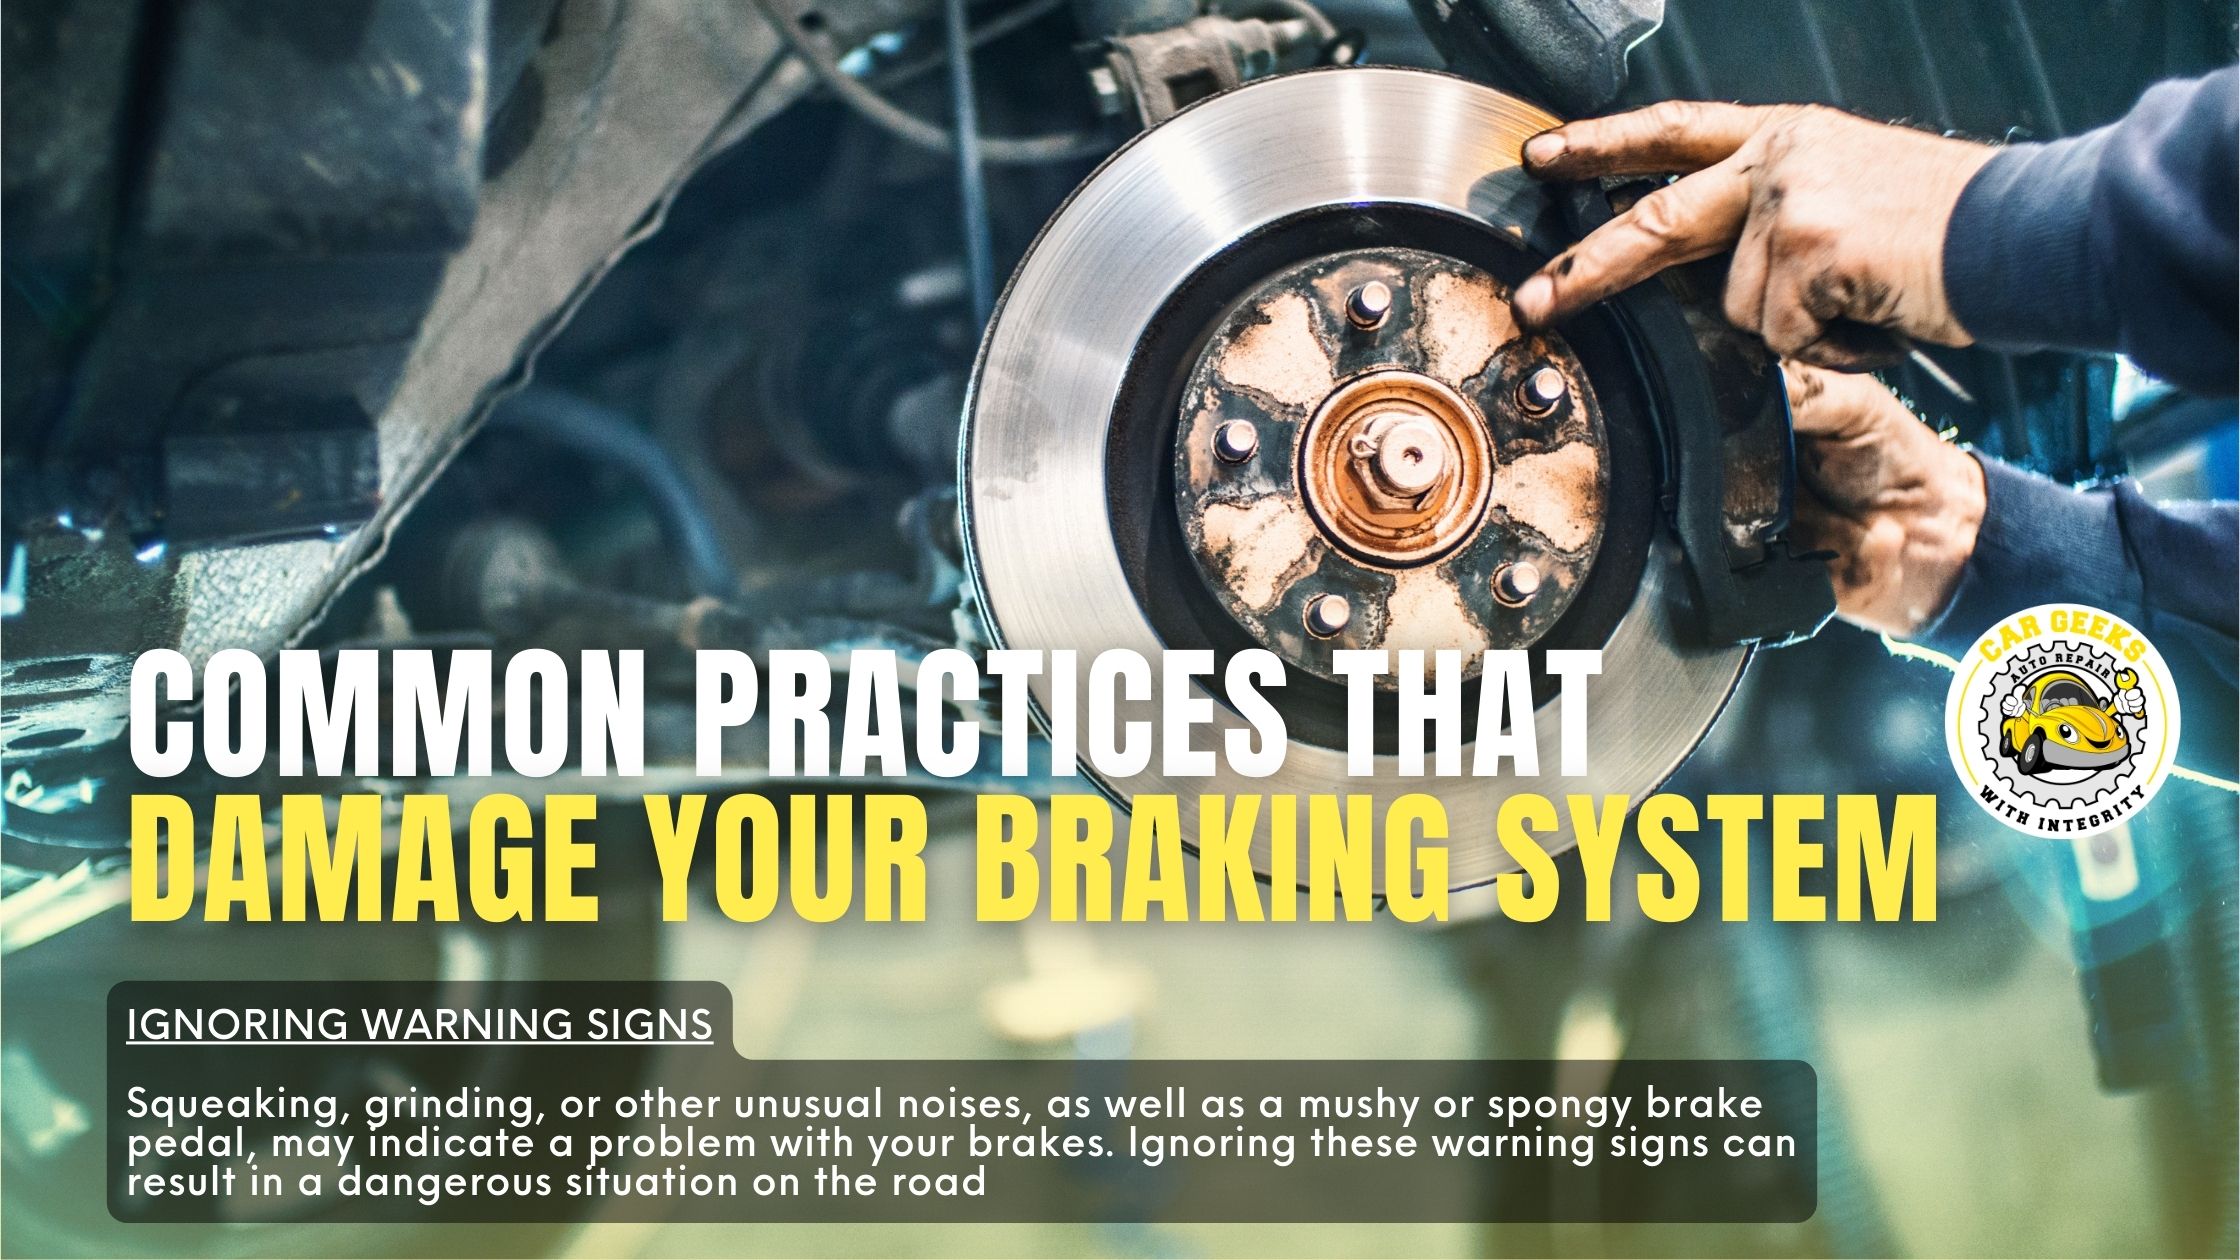 common practices damages brake system ignoring warning signs